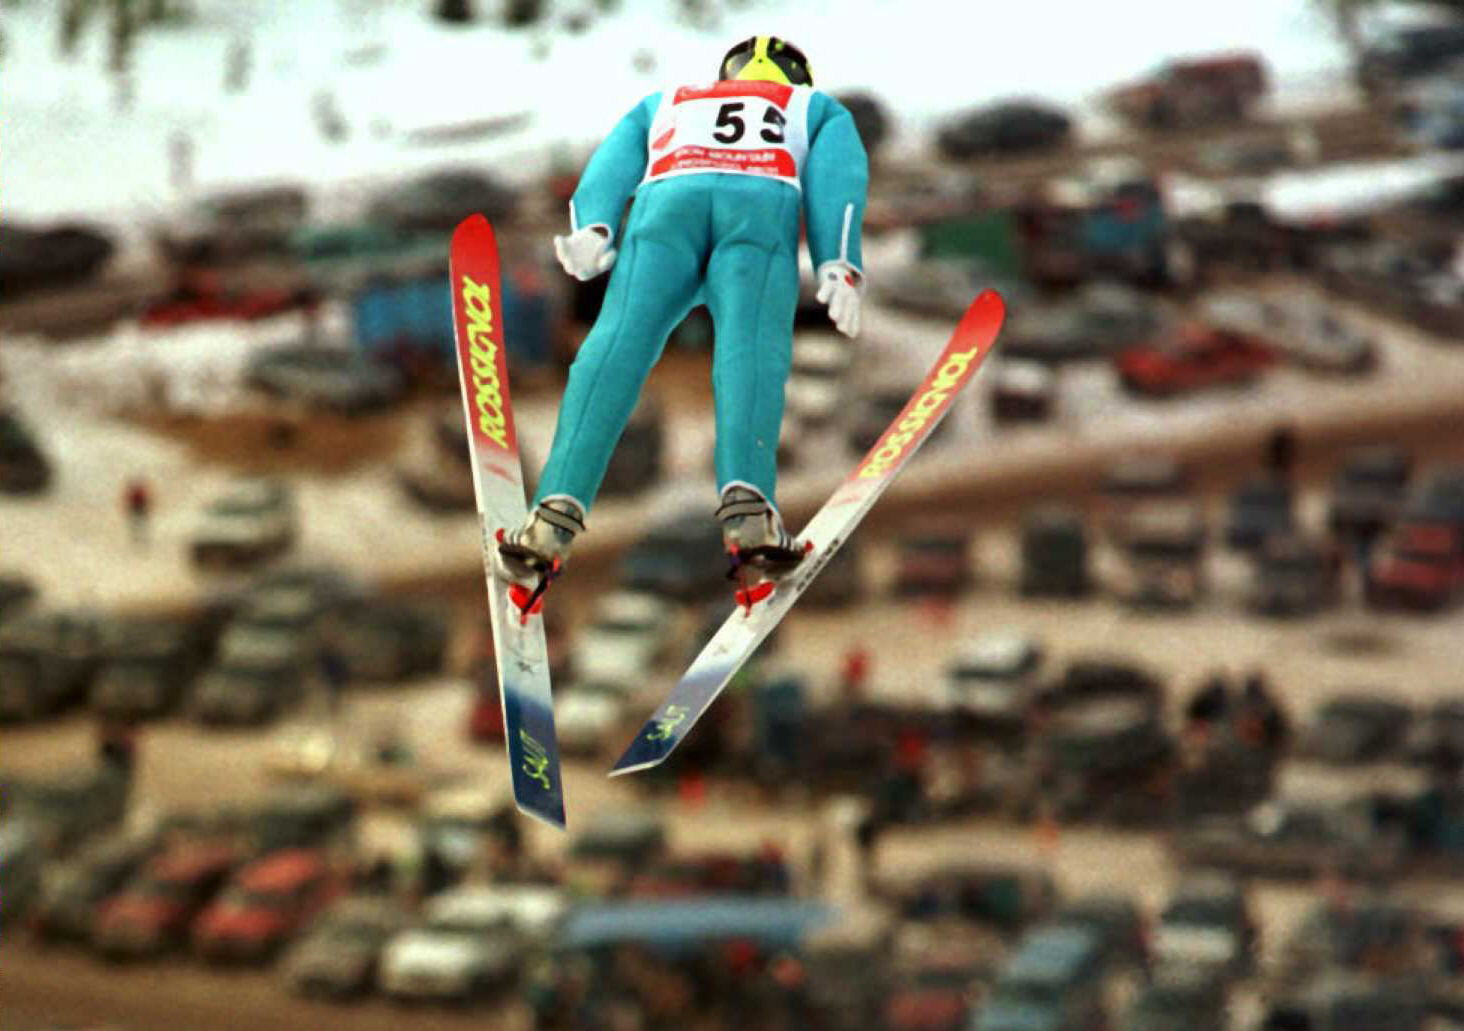 Iron Mountains return to FIS Ski Jumping World Cup circuit cancelled